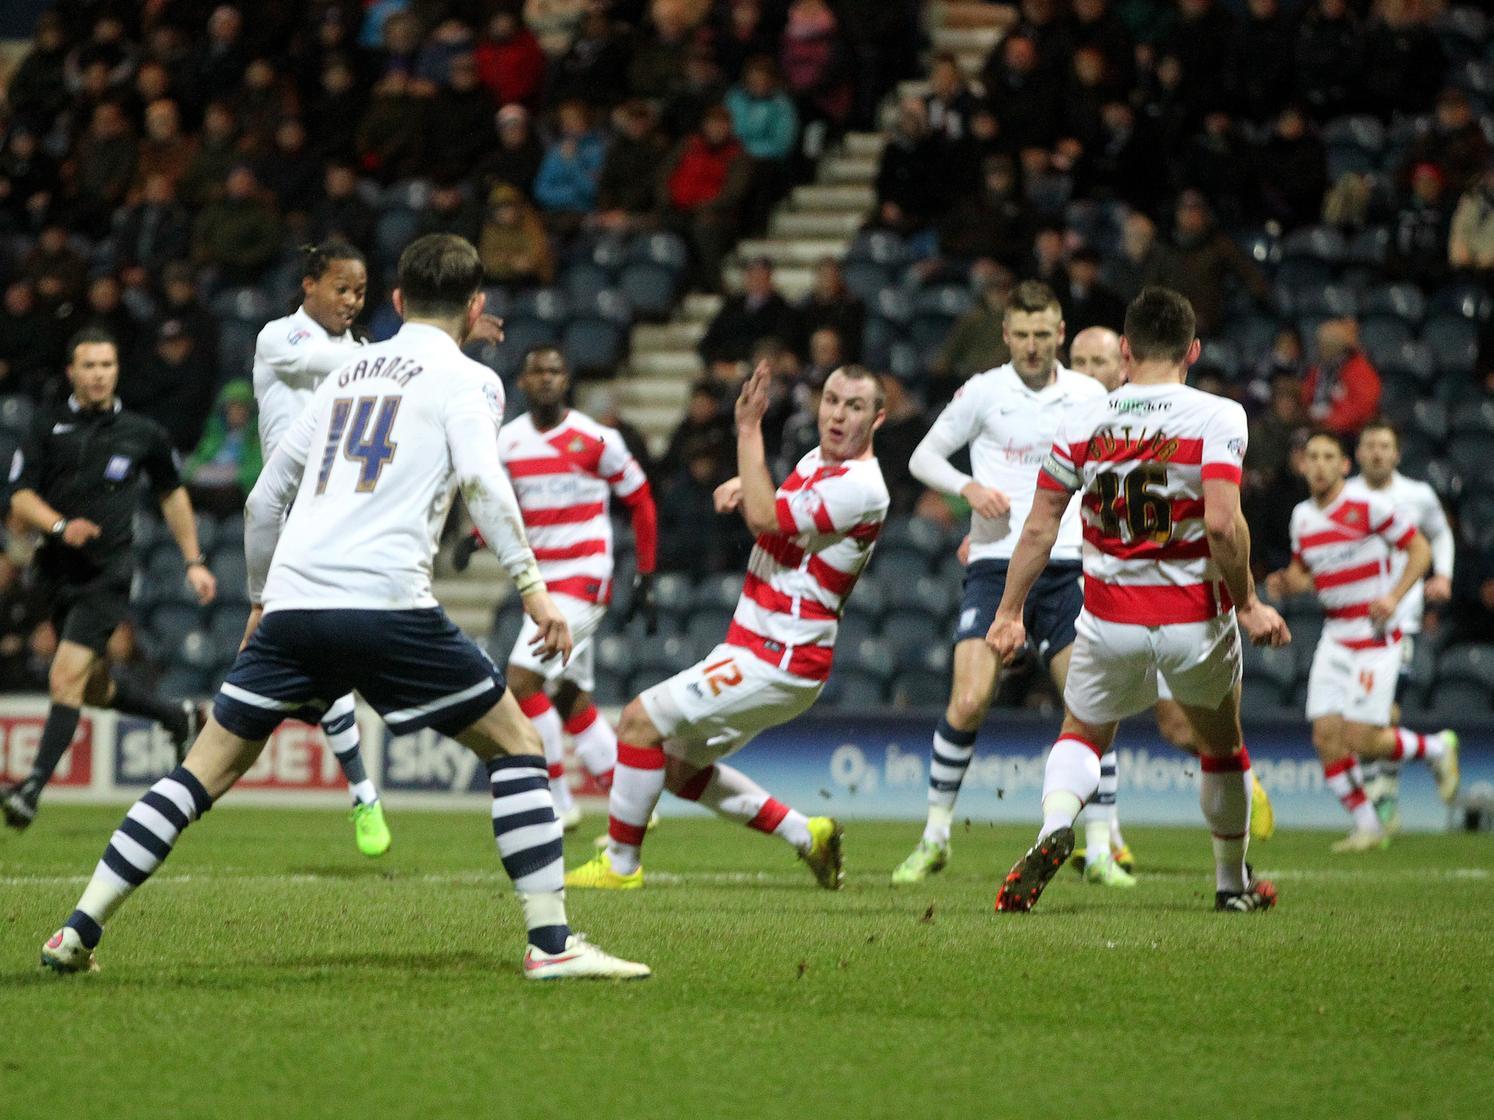 Daniel Johnson's goal against Doncaster in March 2015 was his fourth in successive matches